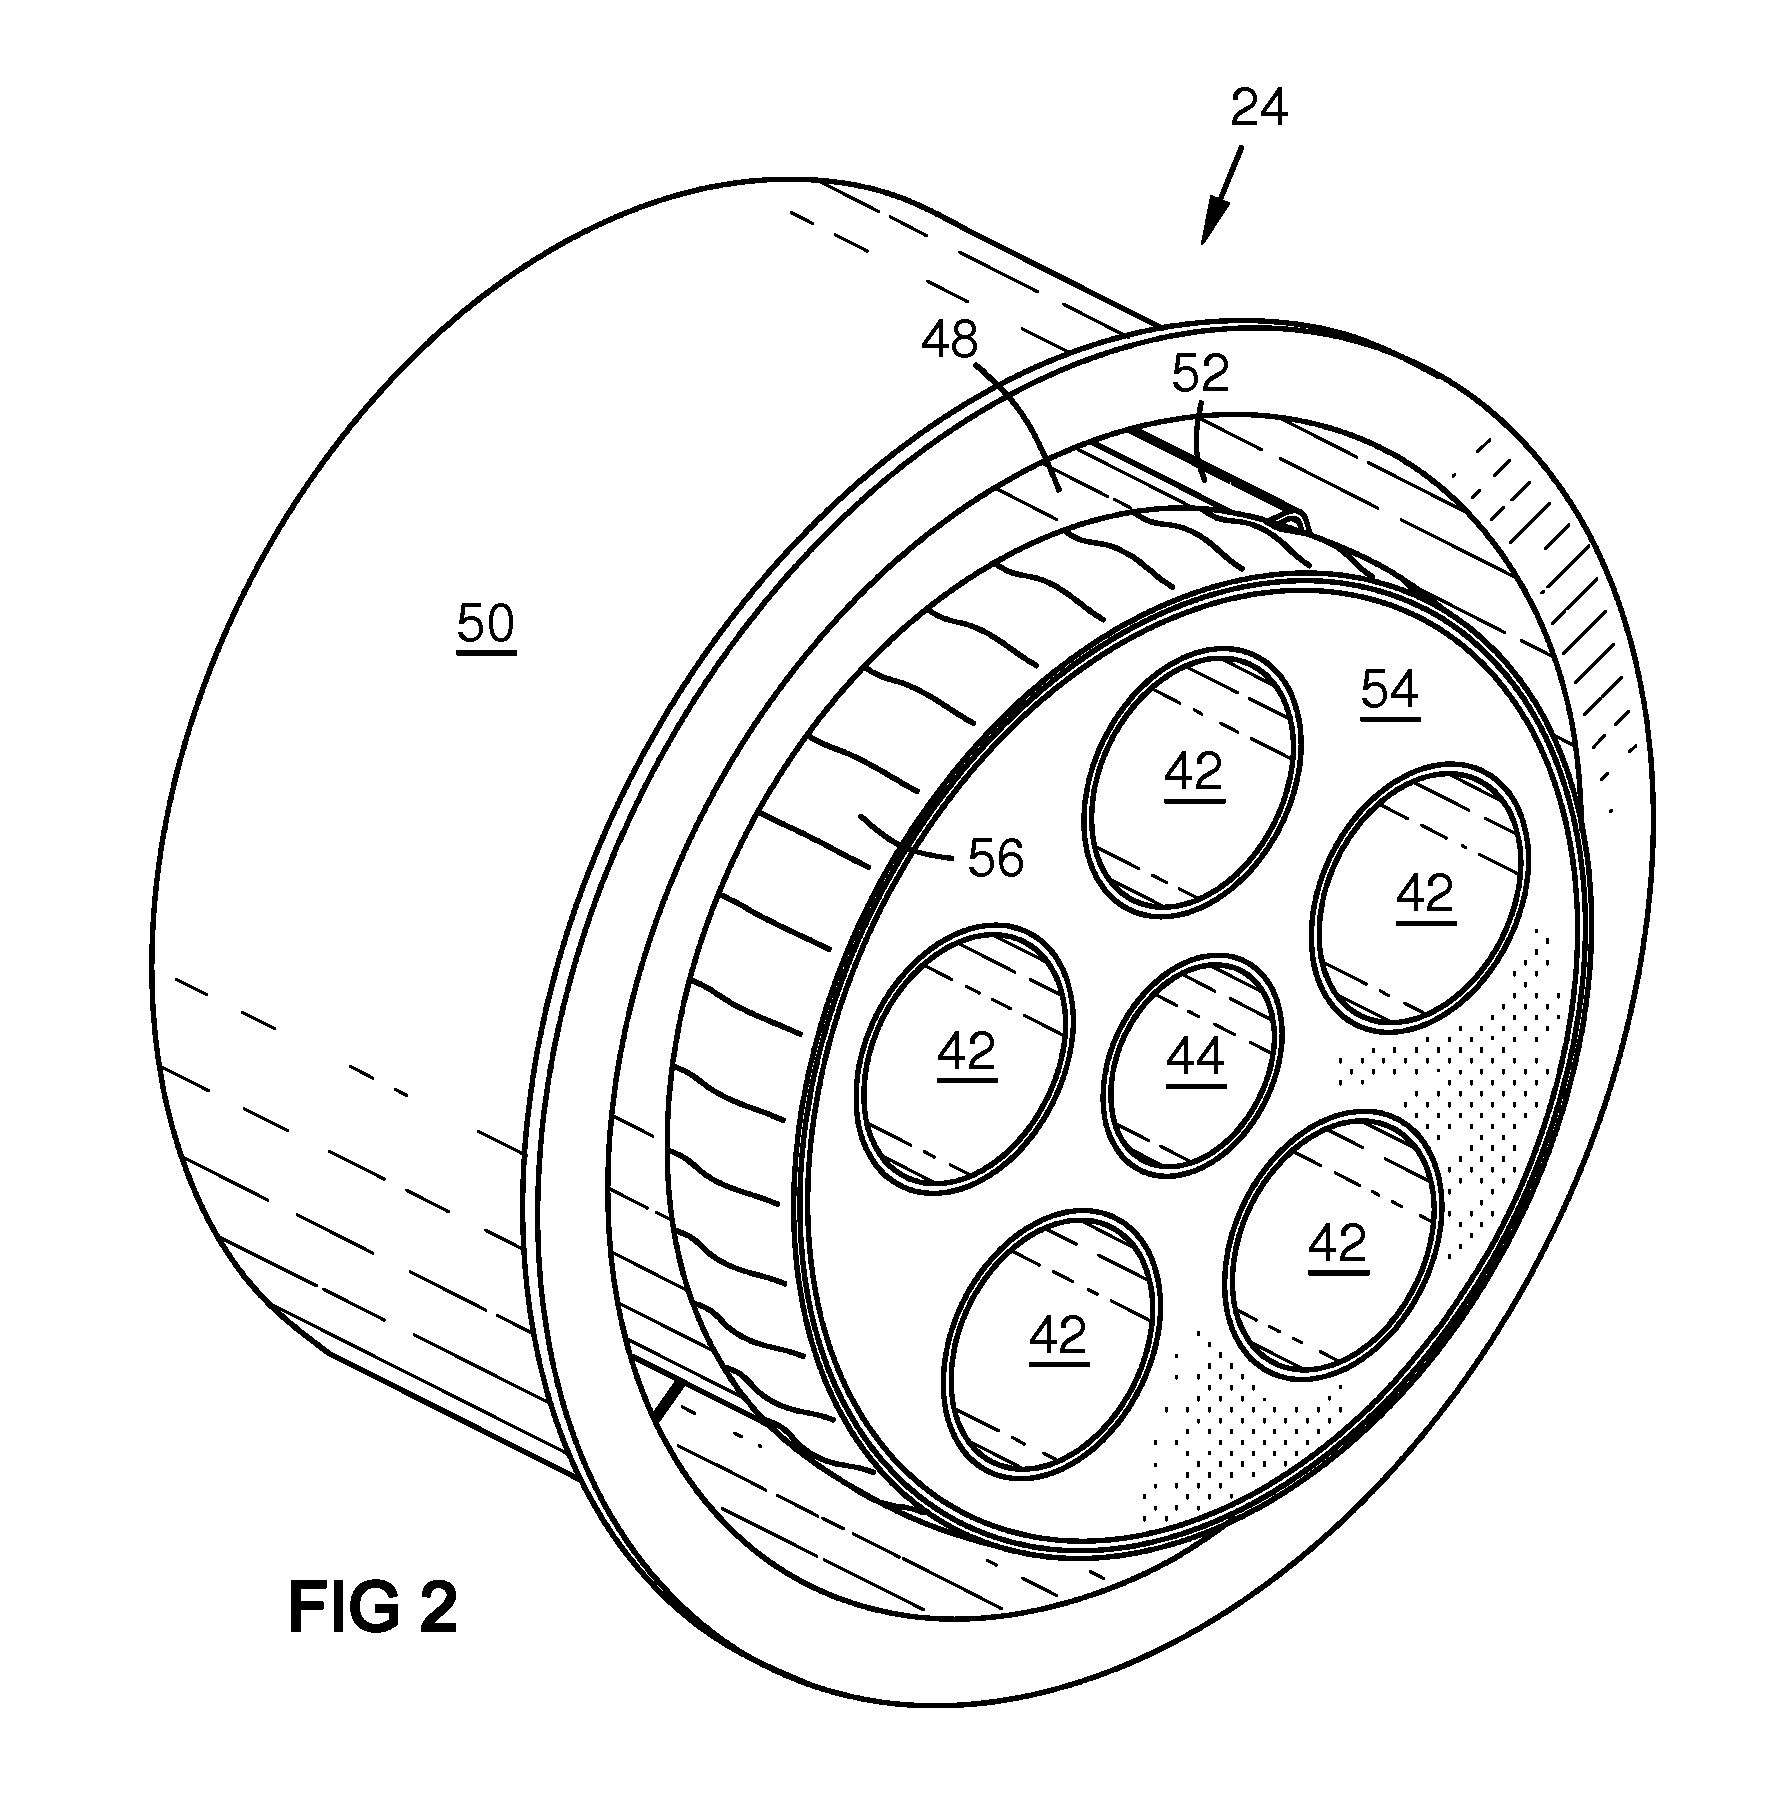 Structural frame for gas turbine combustion cap assembly